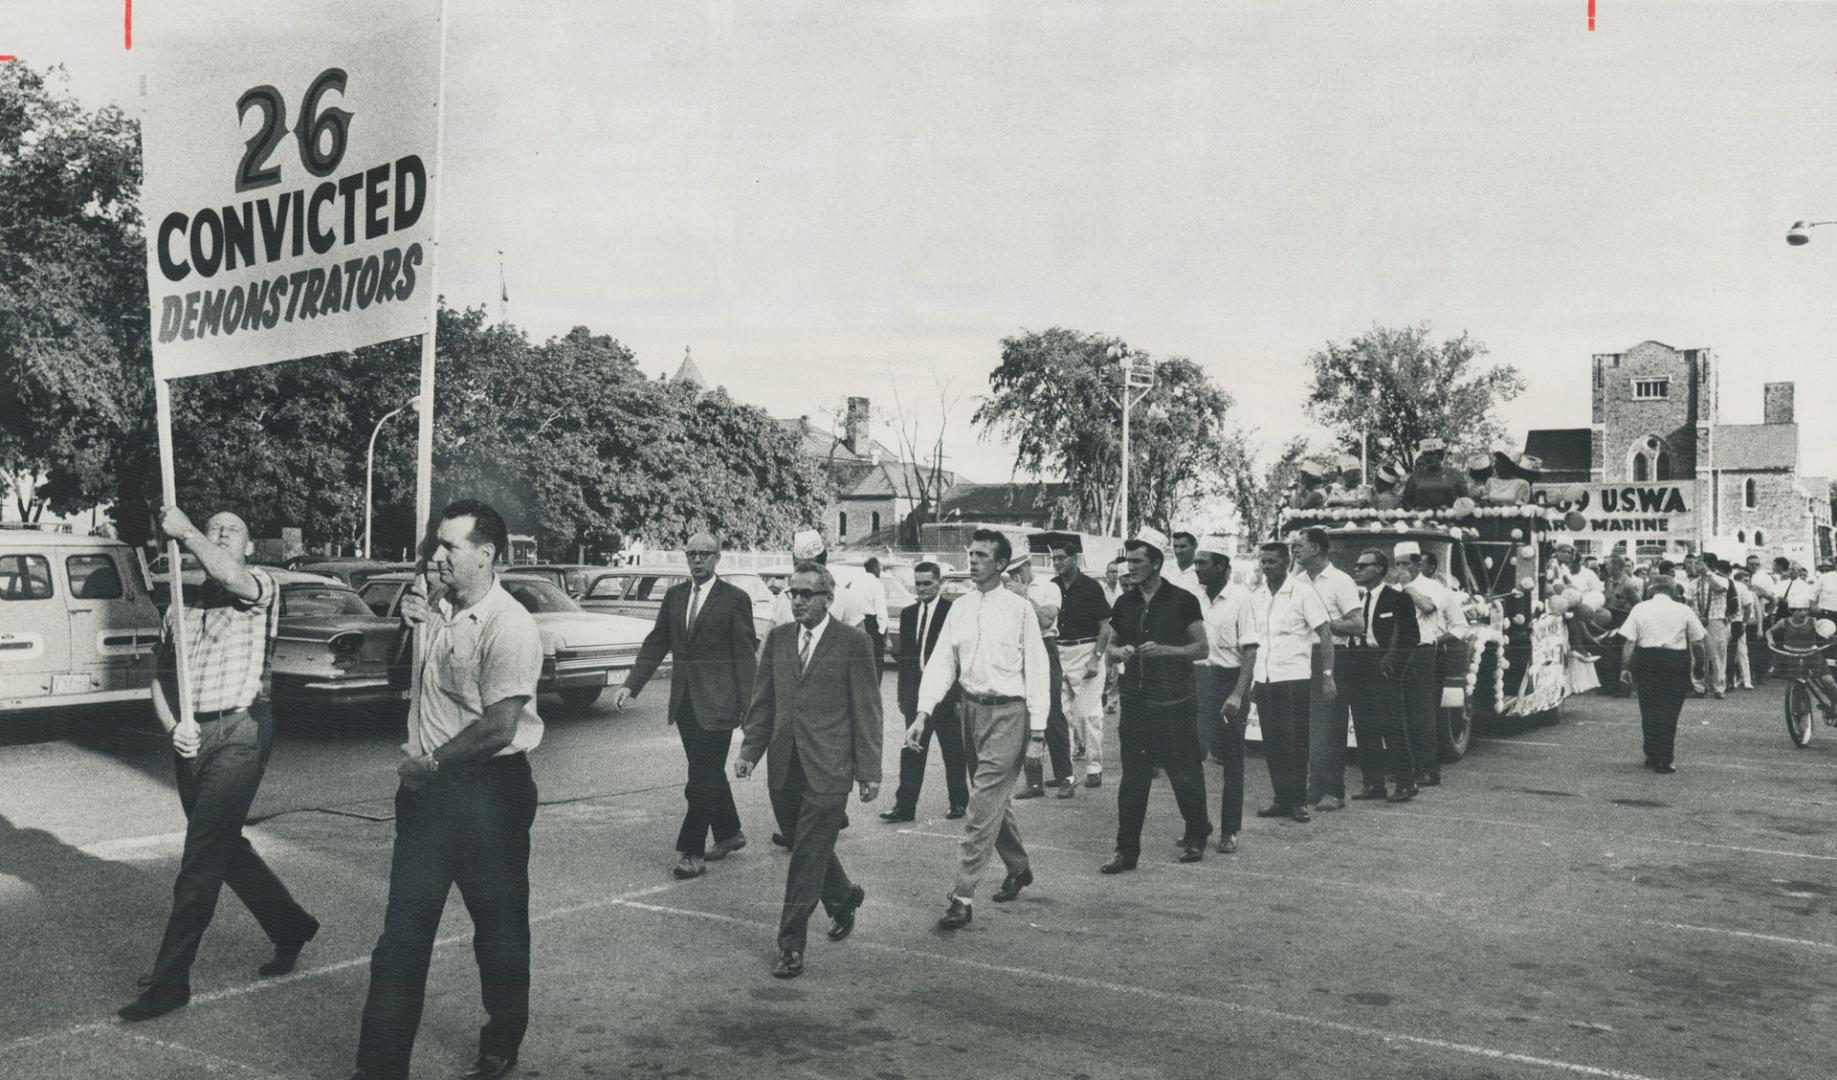 The 26 convicted demonstrators take part in tilco strikers' parade through streets of peterborough yesterday, Unionists from Hamilton, Oshawa, Kingsto(...)